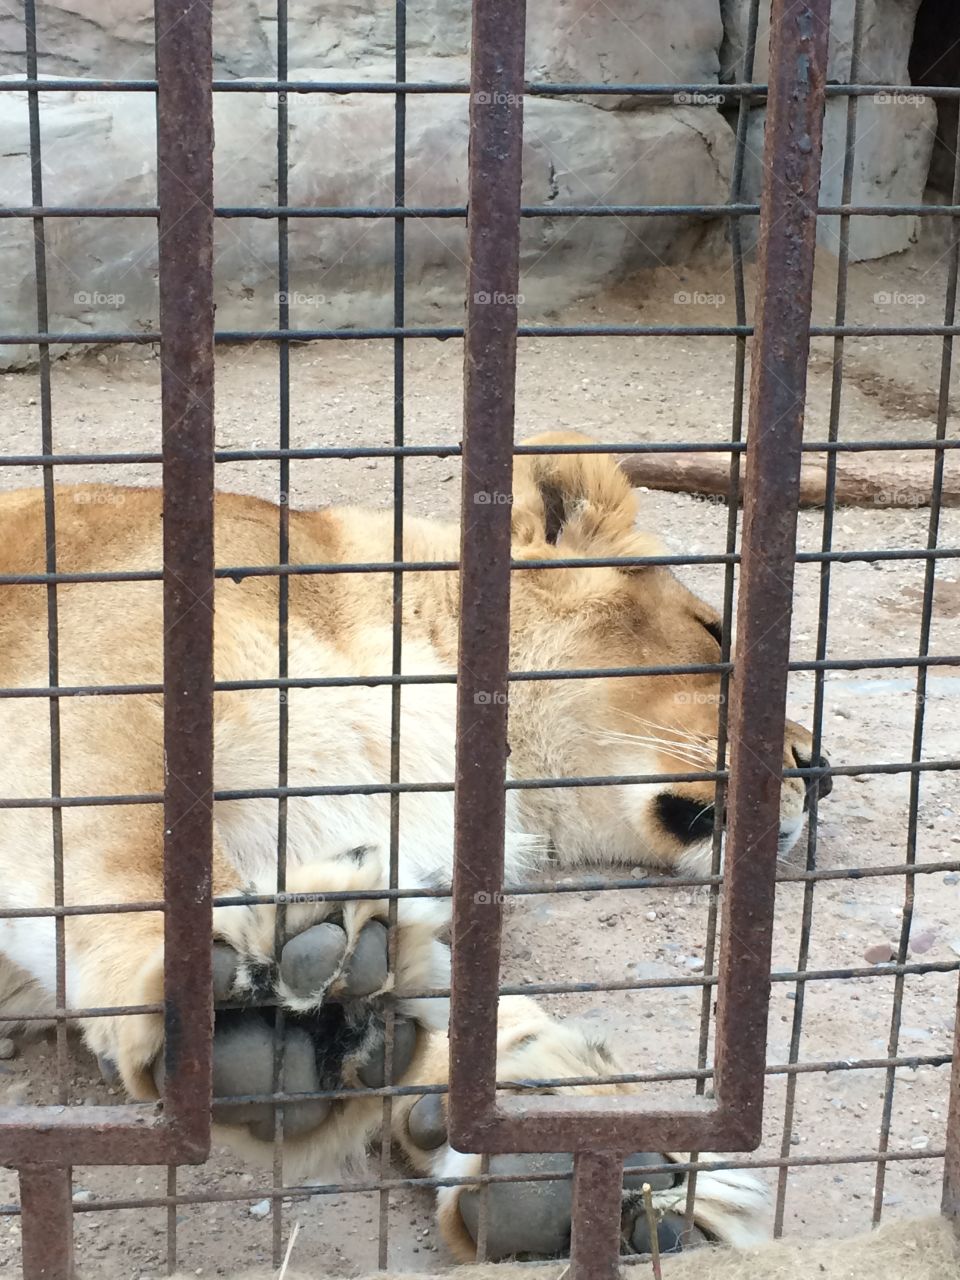 Lion. Sleepy lion in the cage. Zoo experience